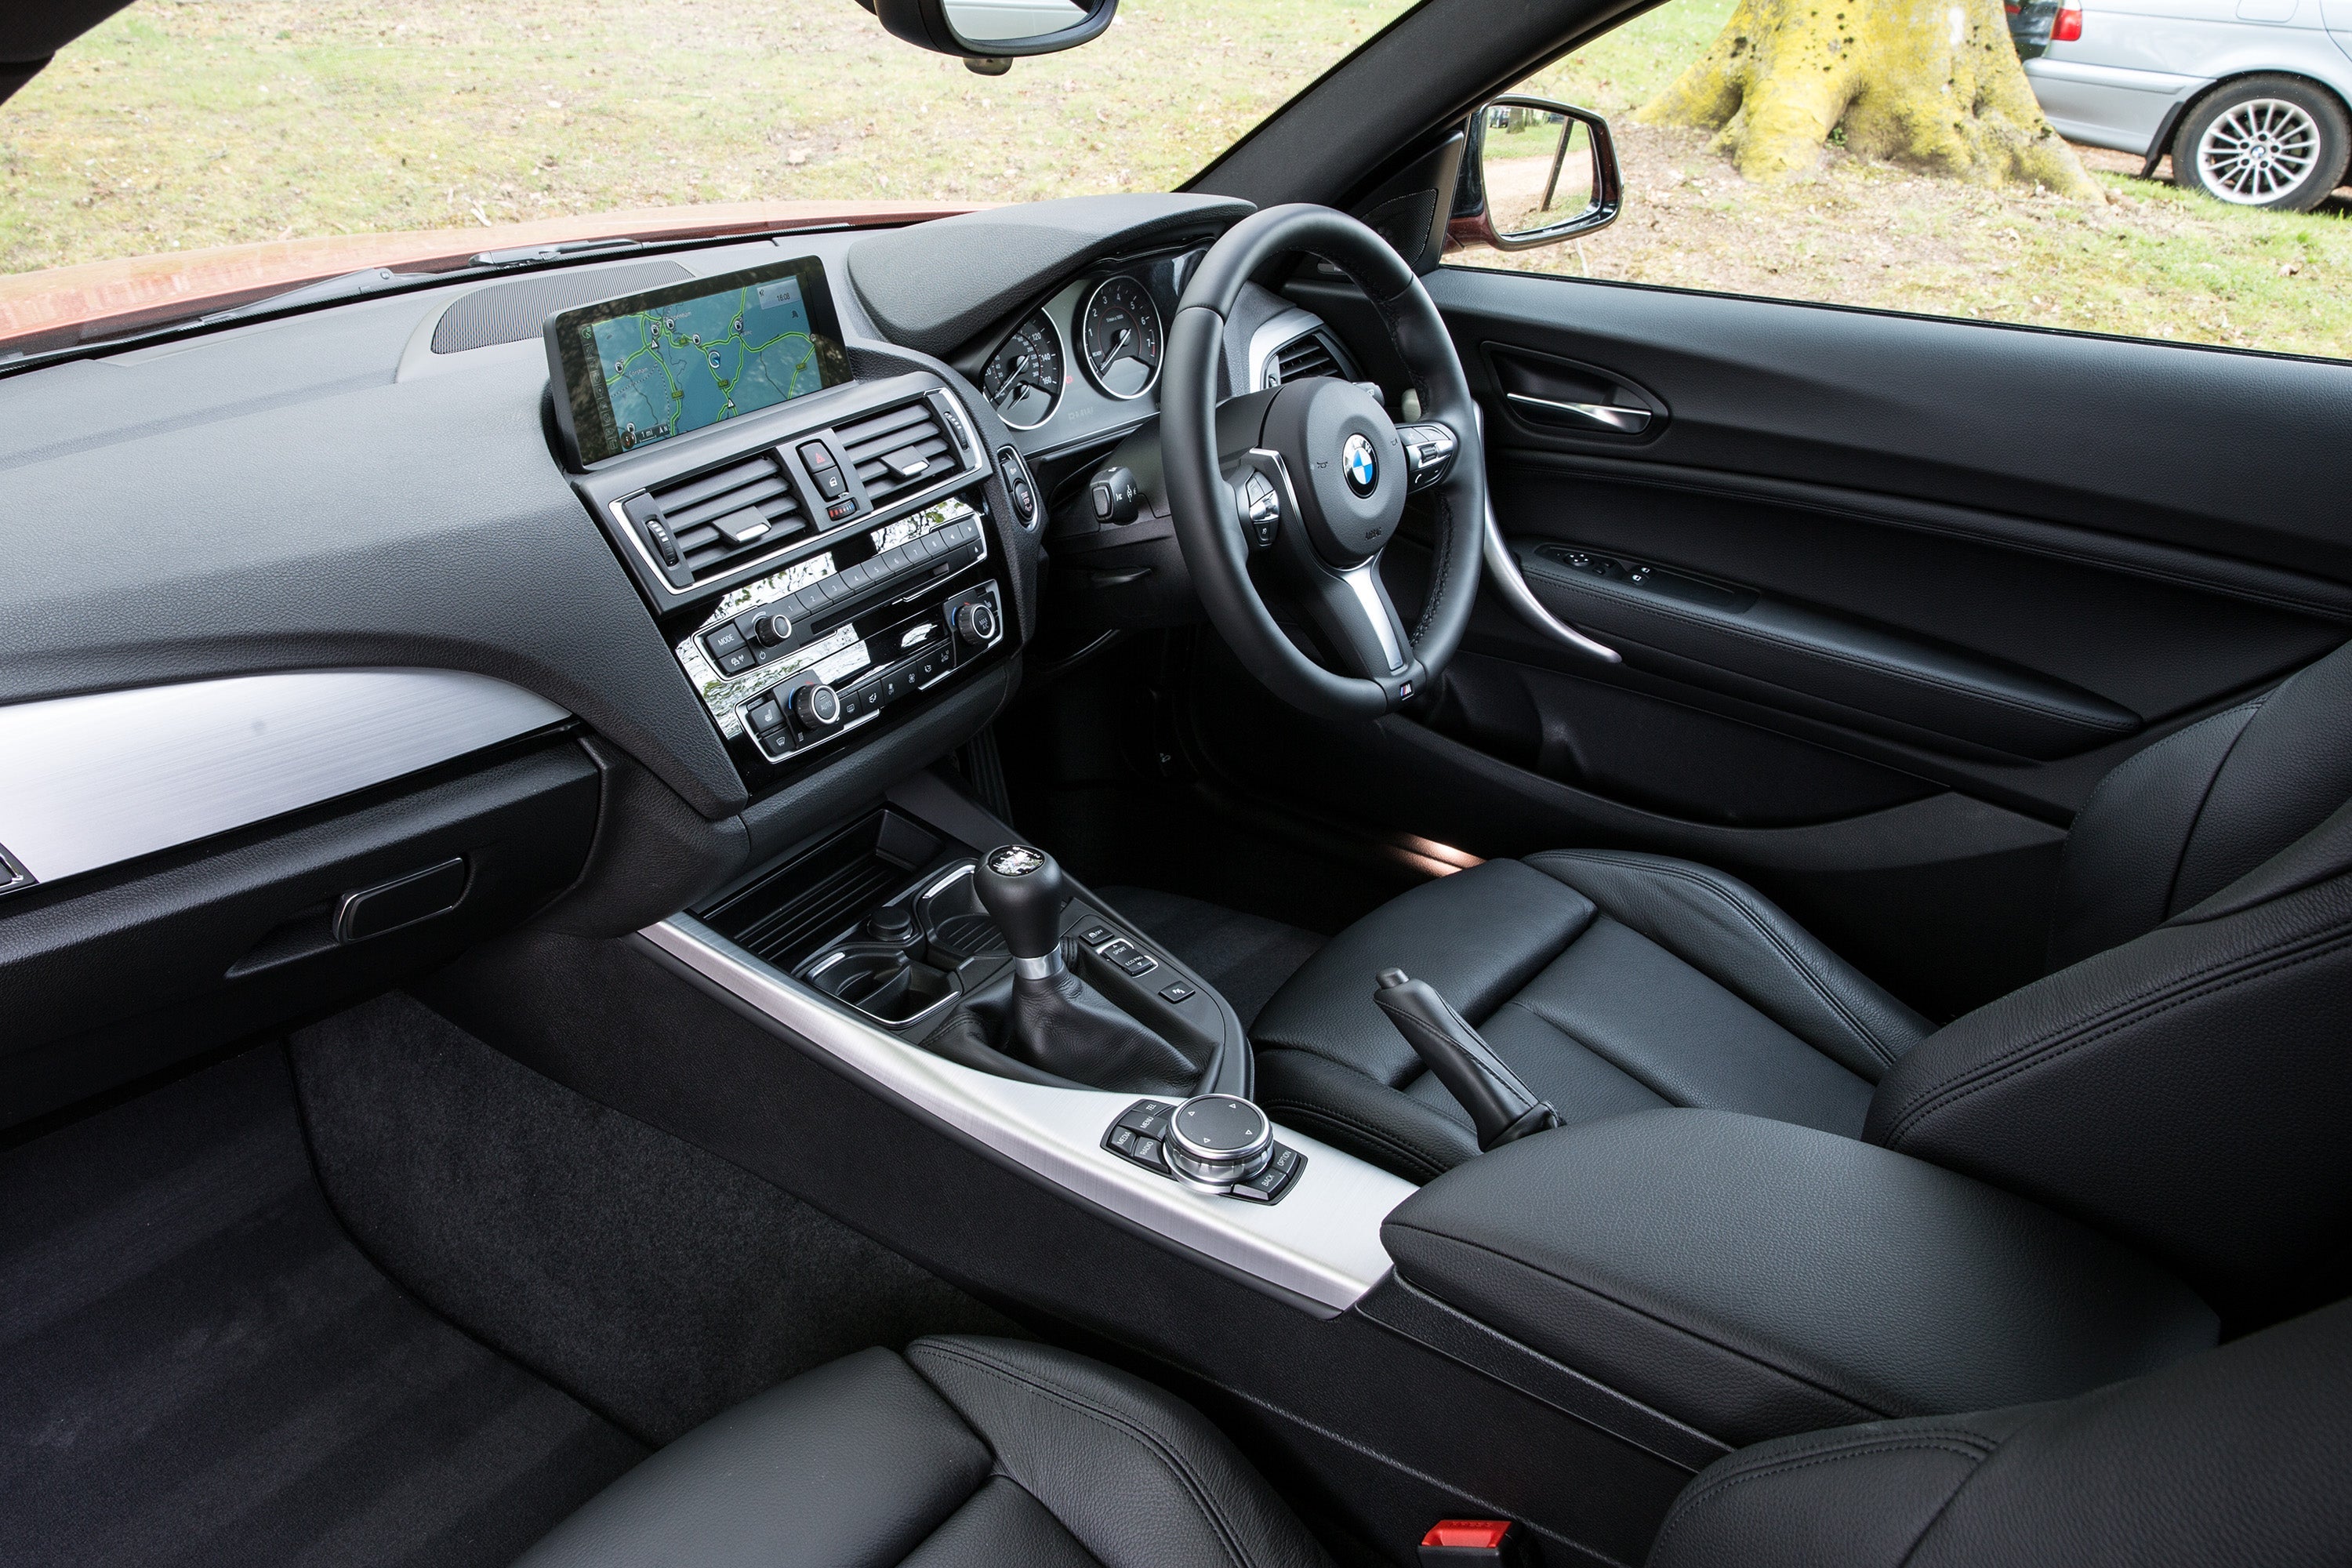 Used BMW 1 Series Review - 2011-2019